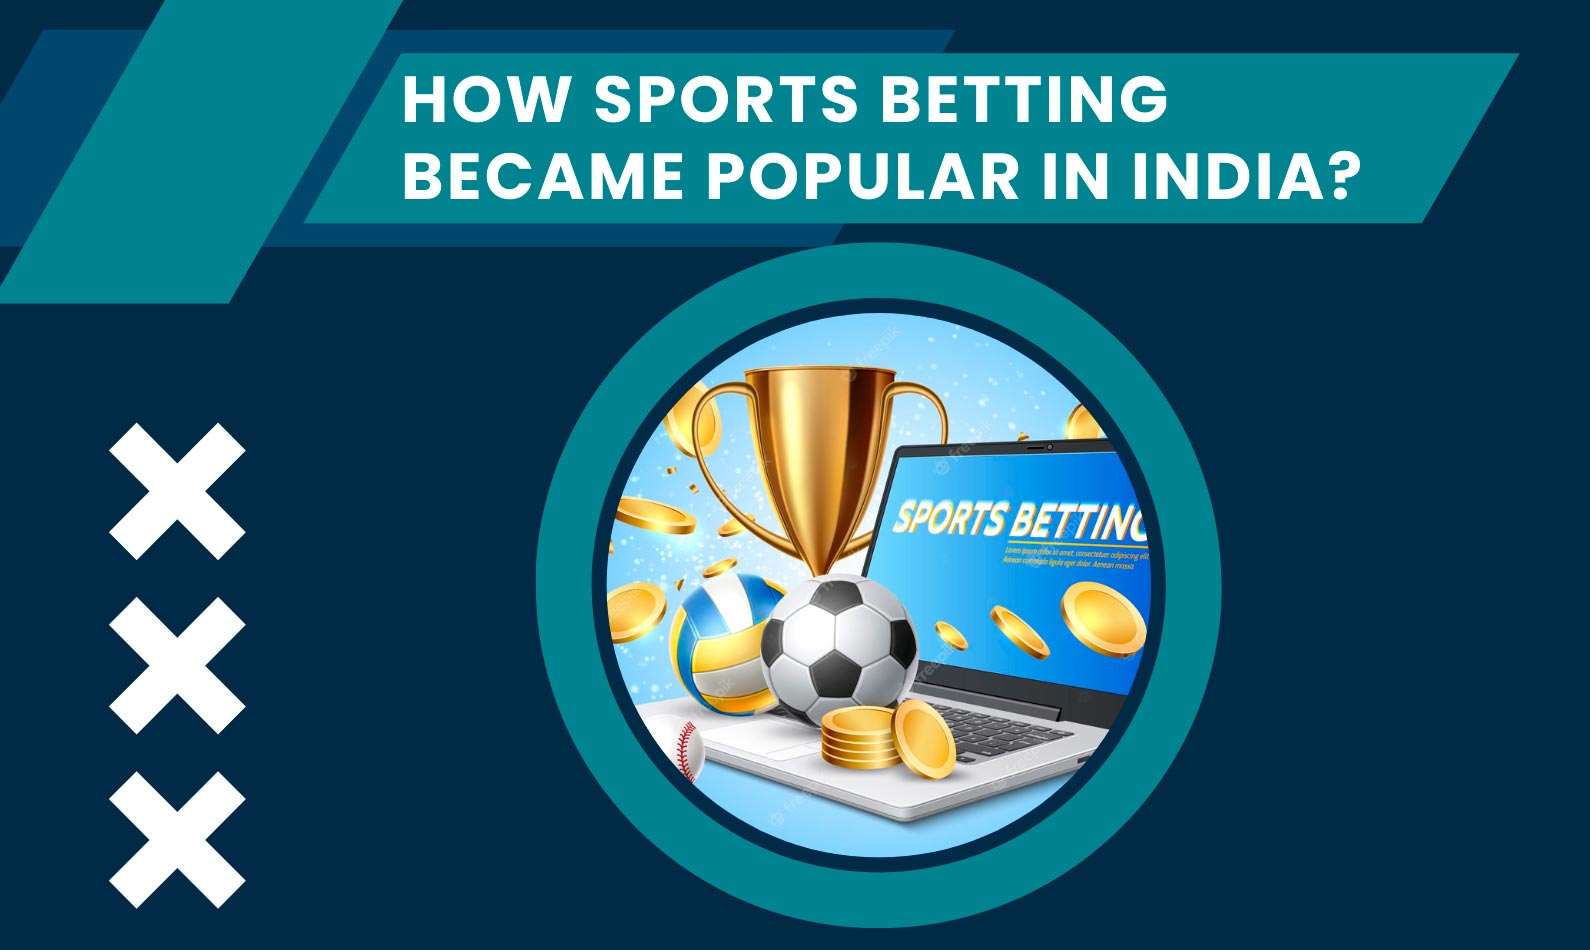 Sports betting has become increasingly popular in India